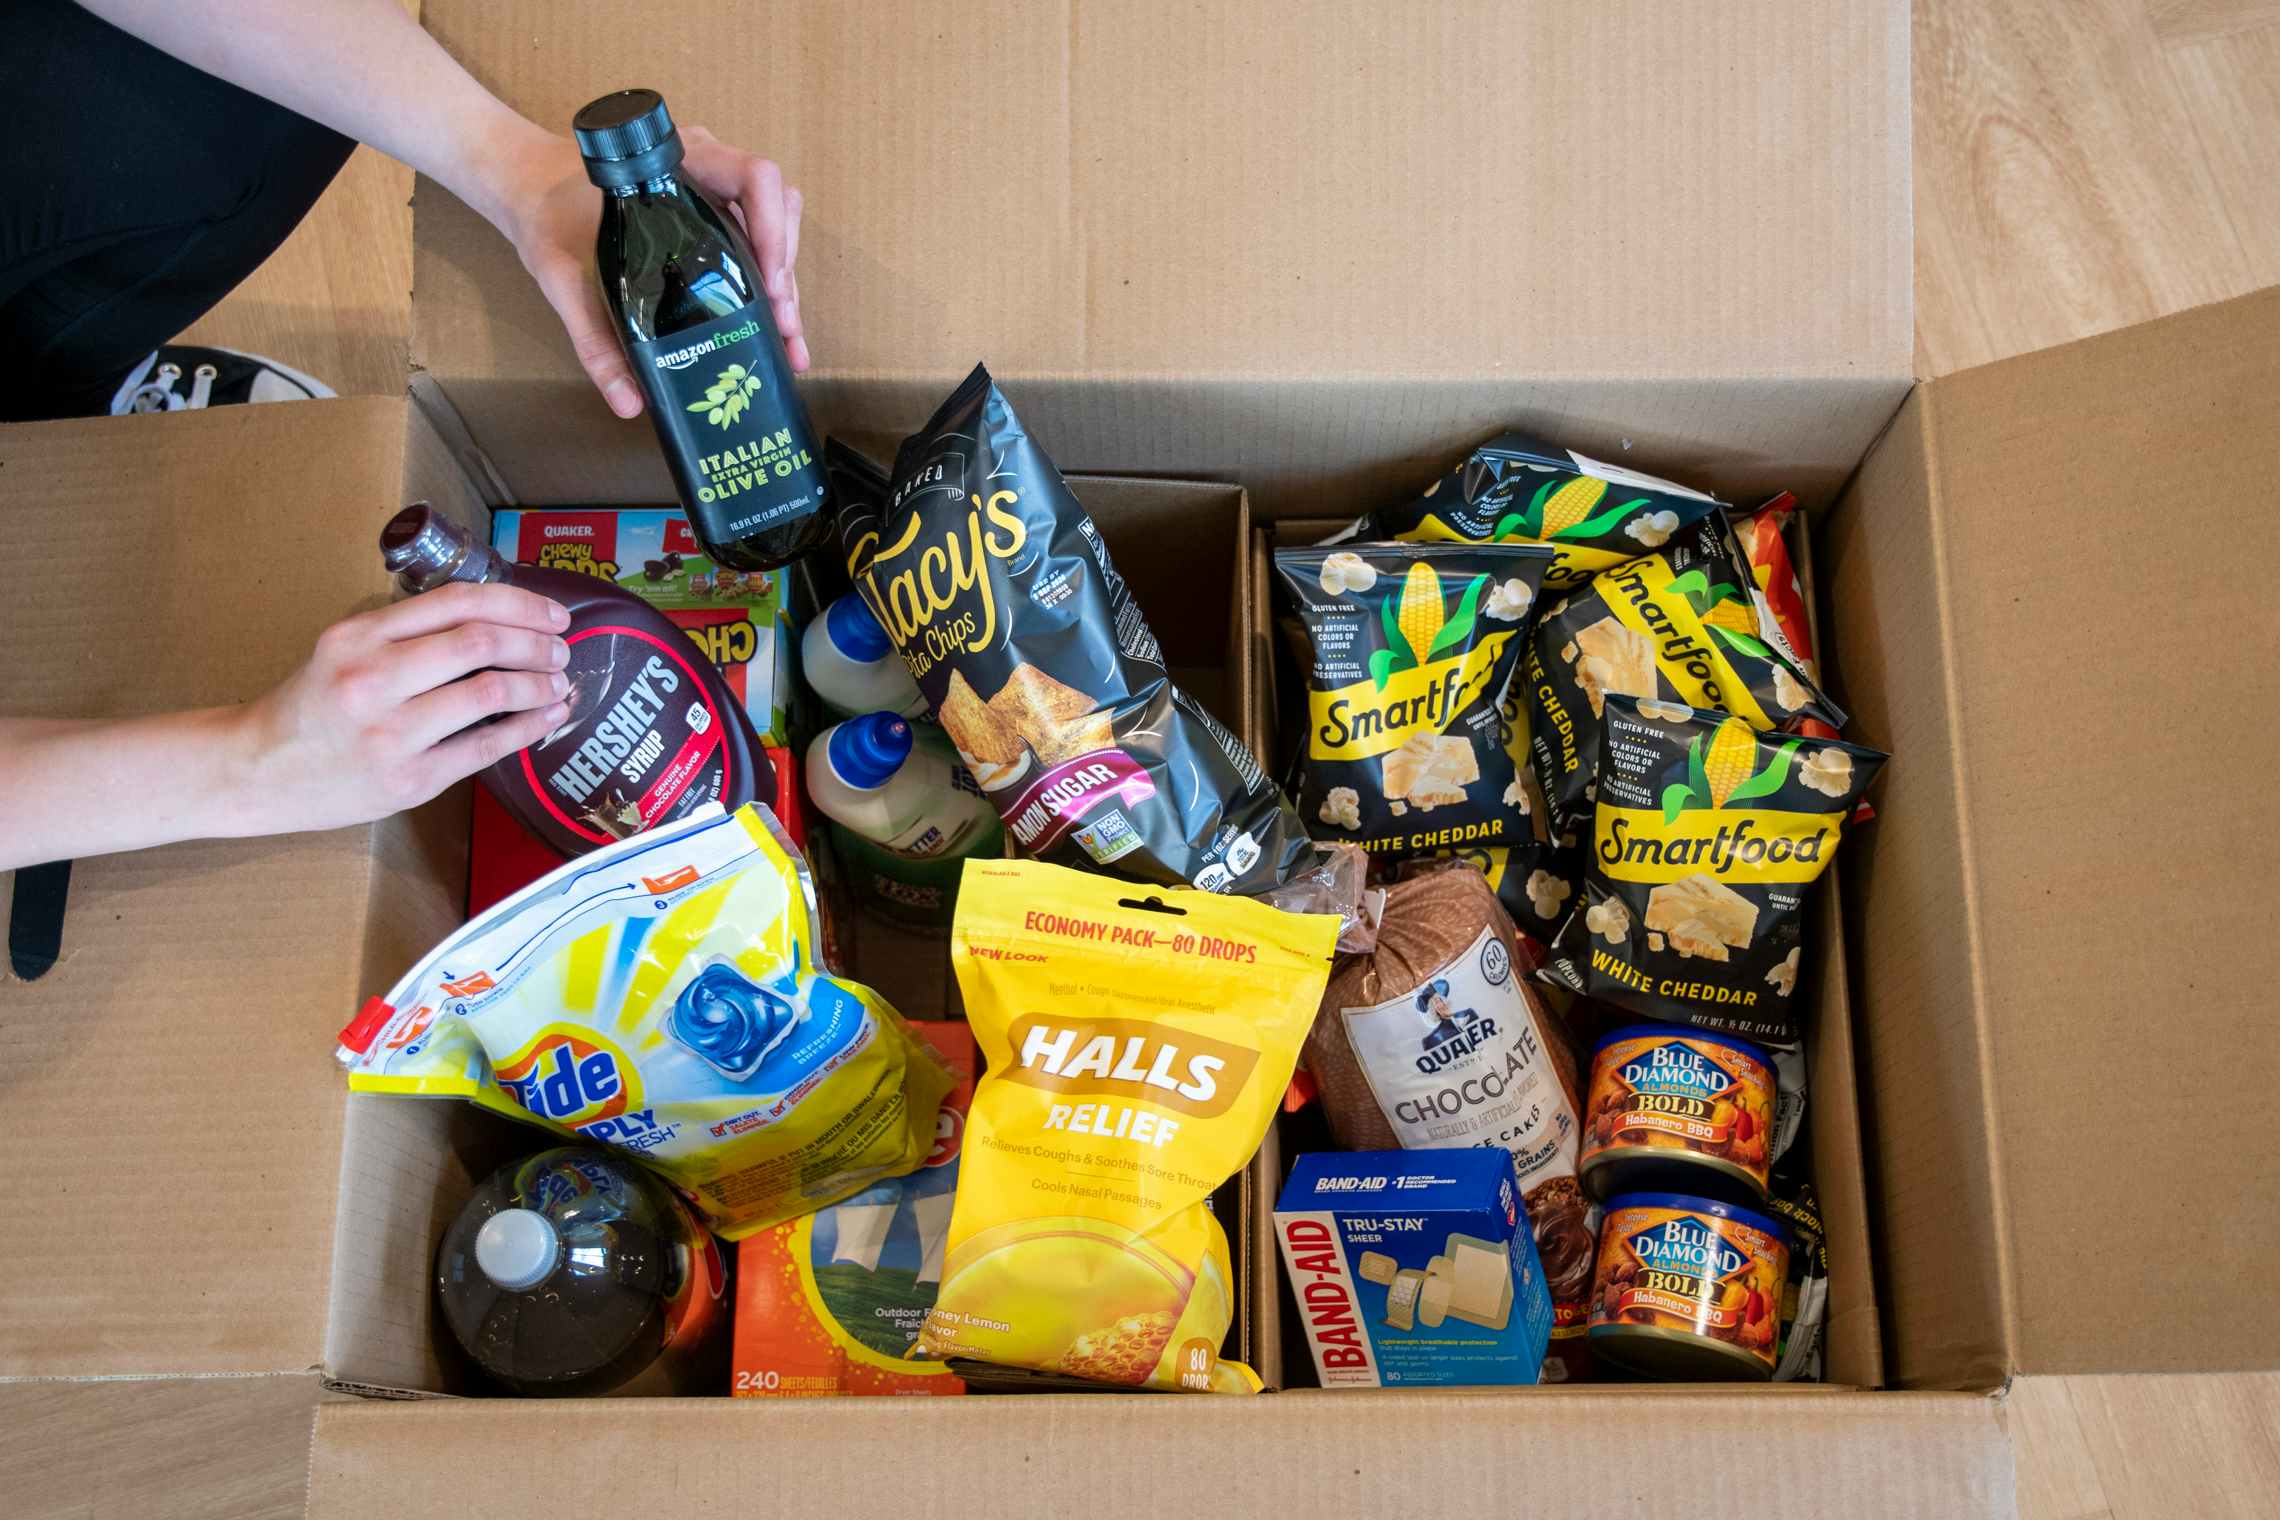 Amazon pantry box with products.